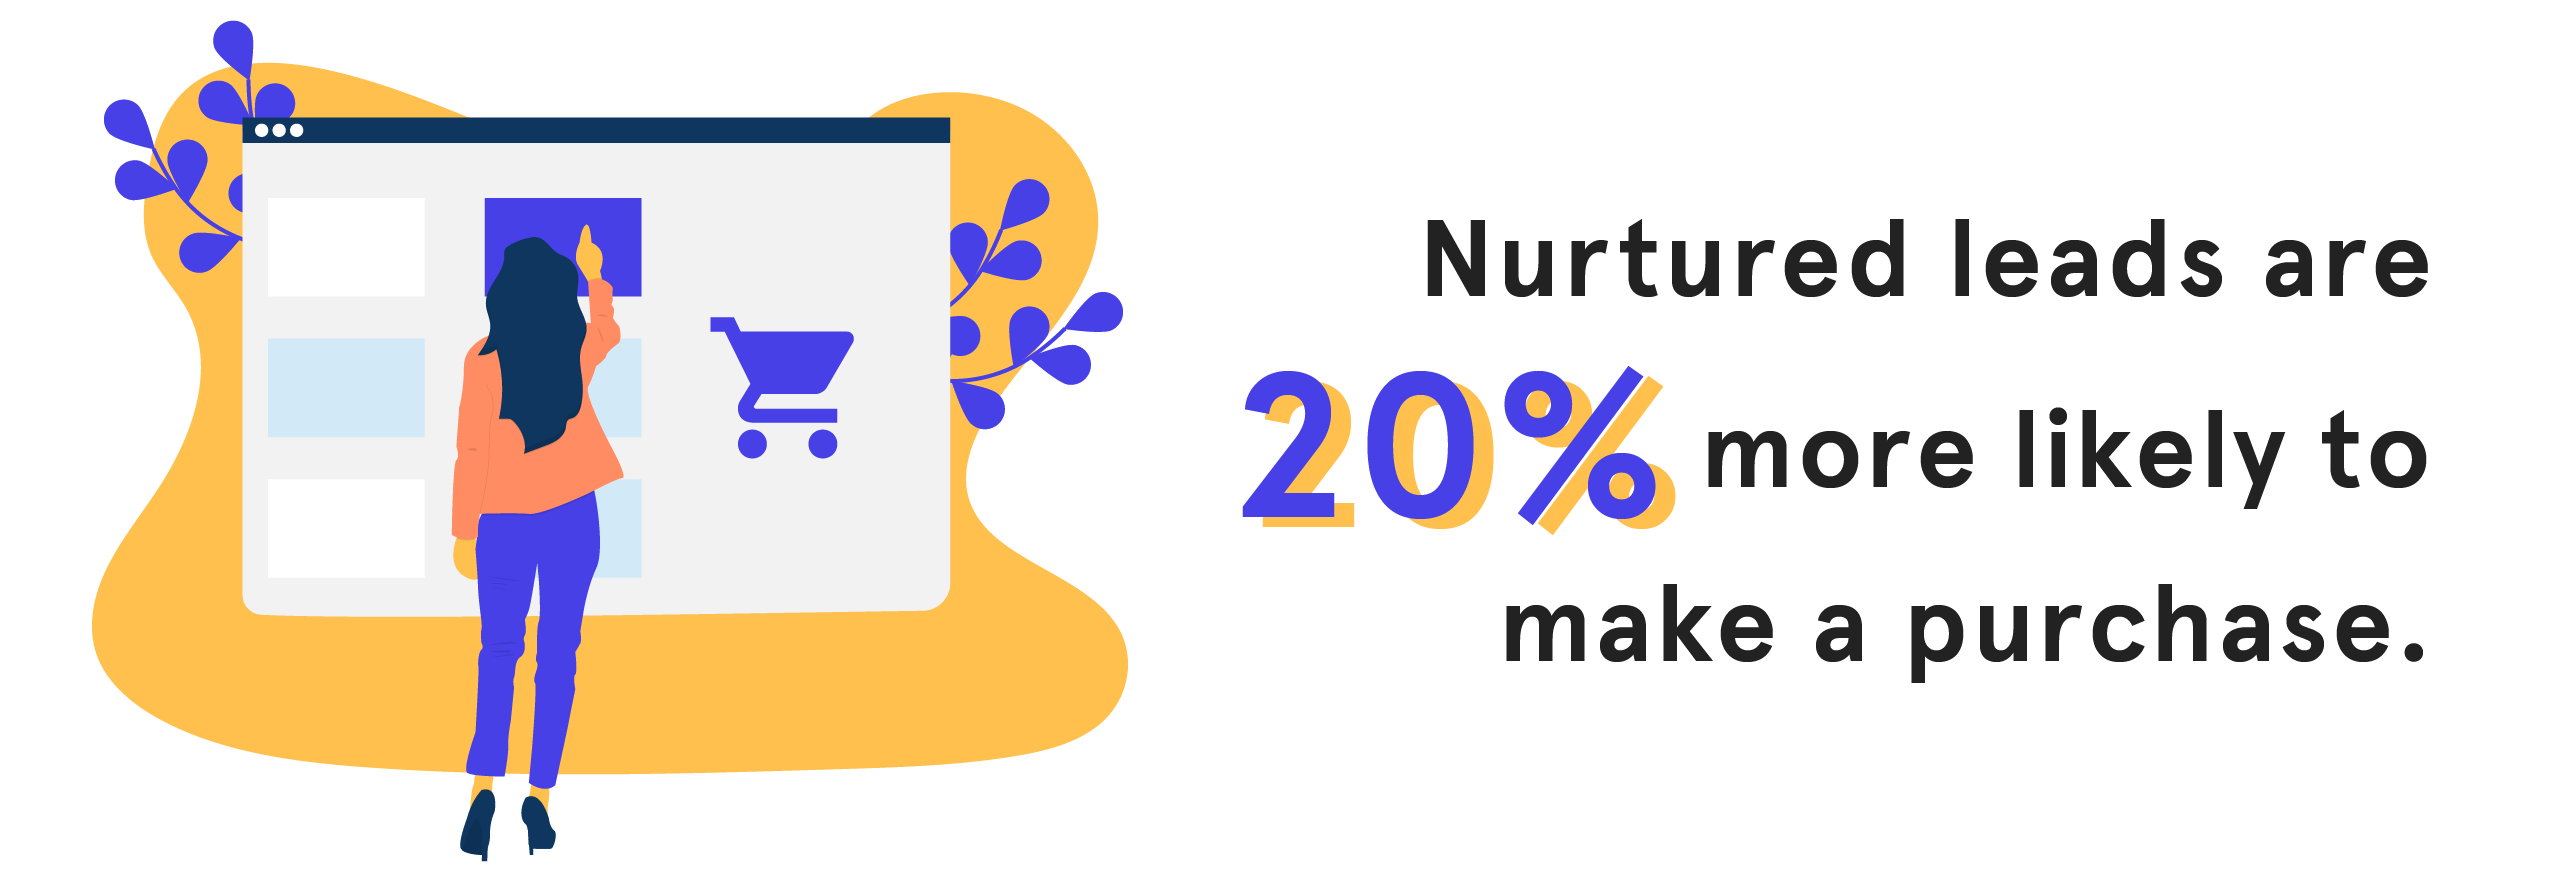 STATS - 08 - Nurtured leads are 20 percent more likely to make a purchase-01